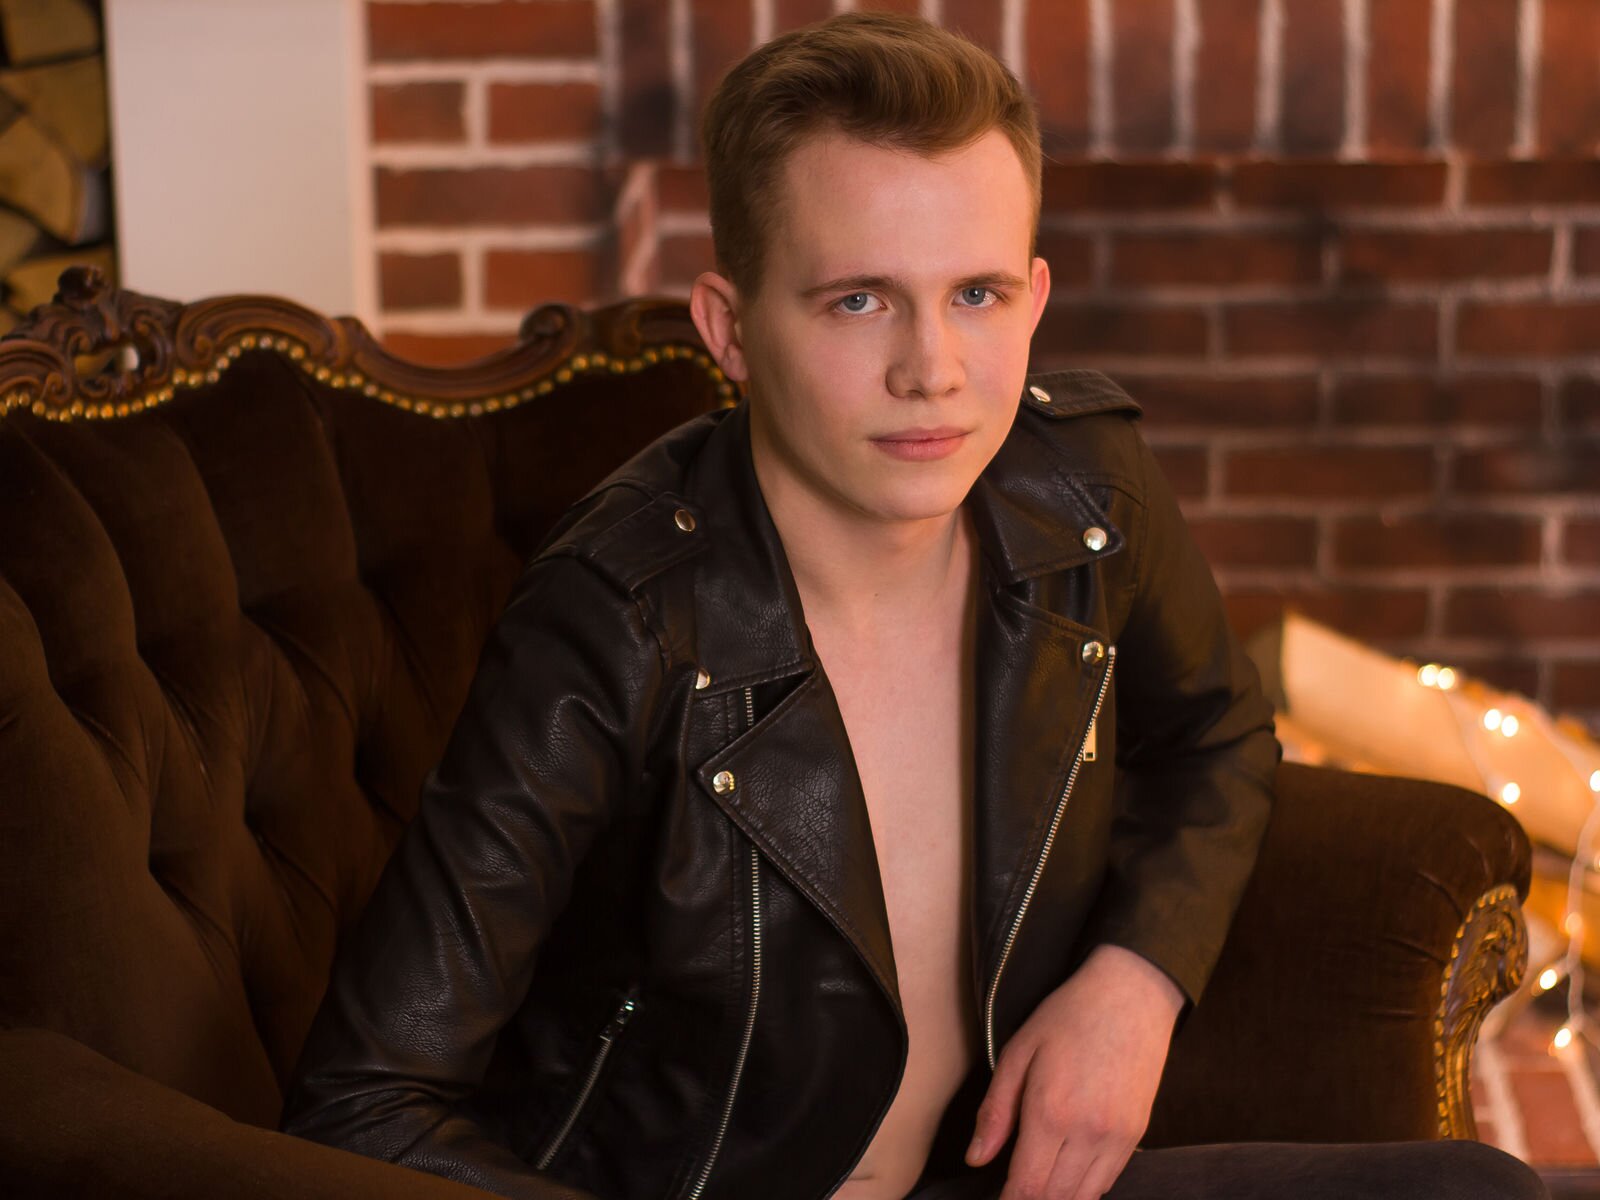 Free Live Sex Chat With CharlieHypnos